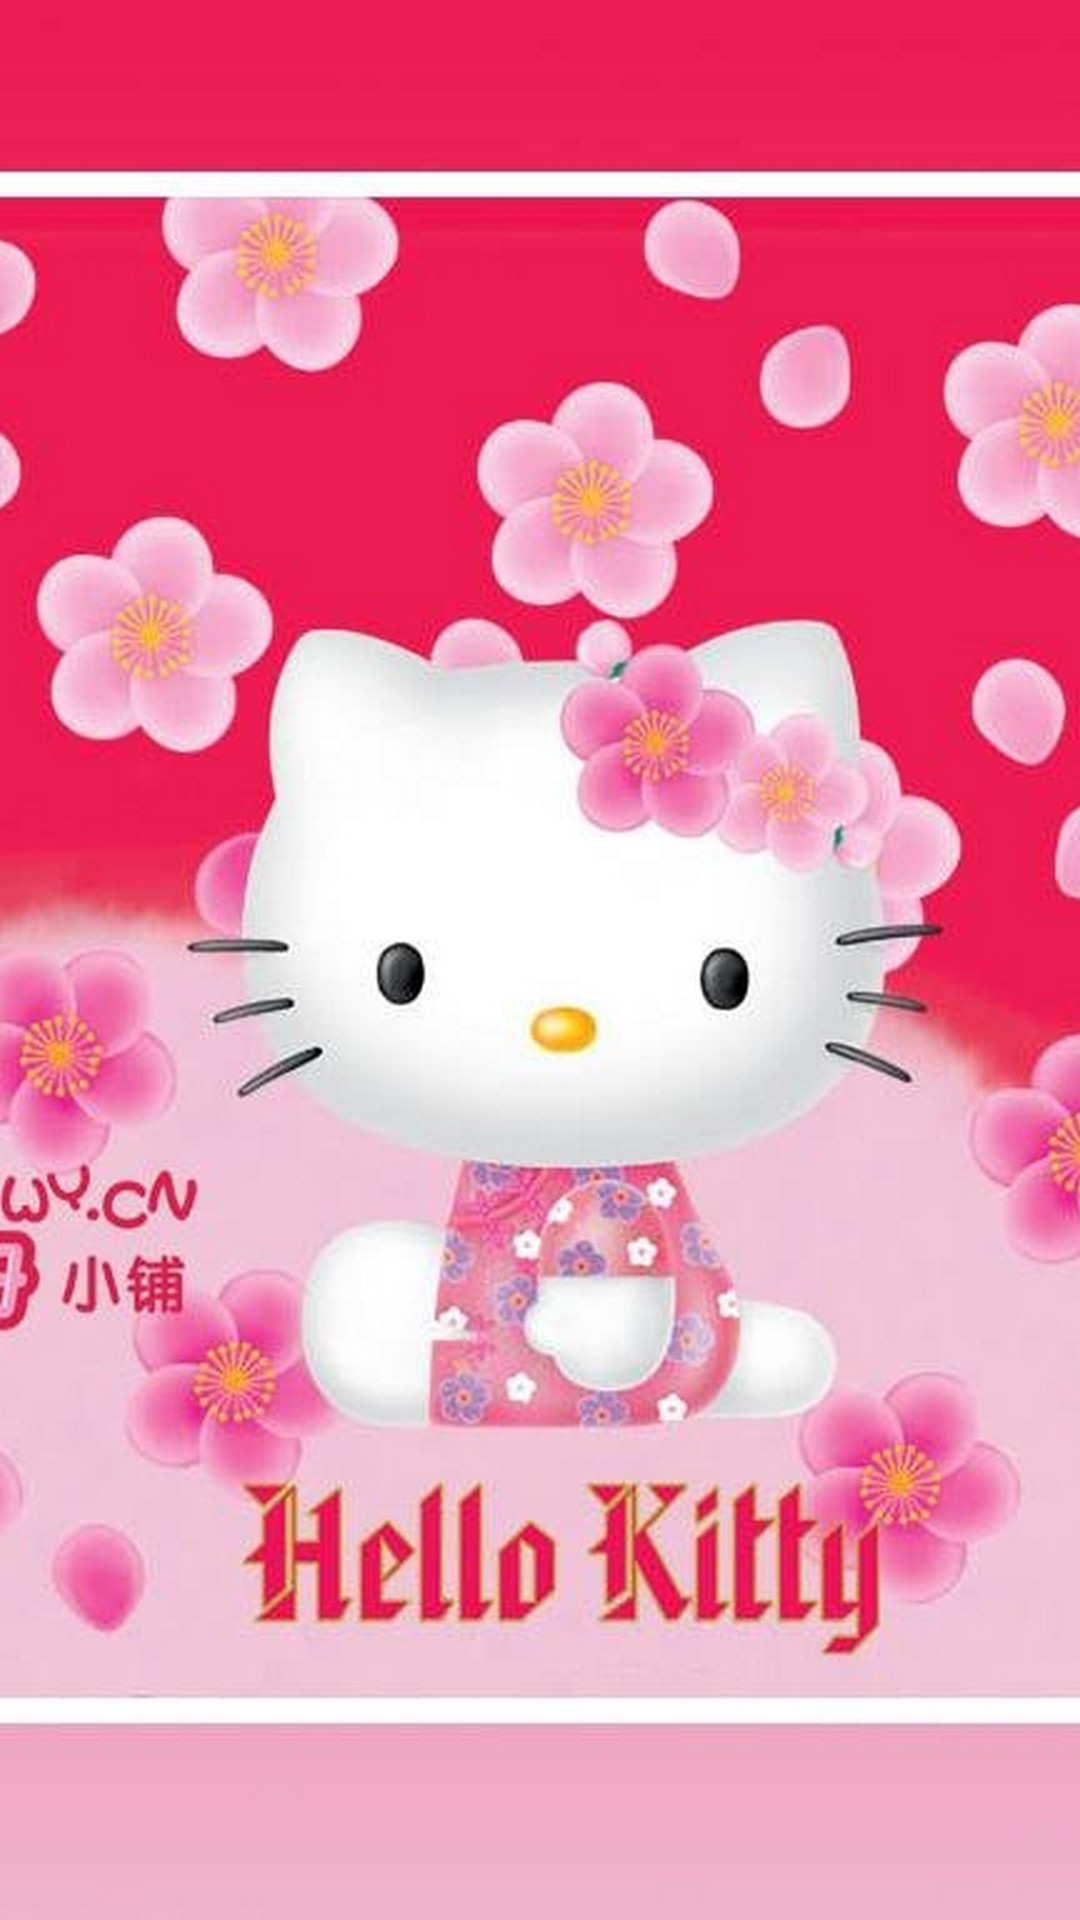 Hello Kitty Characters Wallpaper iPhone with image resolution 1080x1920 pixel. You can make this wallpaper for your iPhone 5, 6, 7, 8, X backgrounds, Mobile Screensaver, or iPad Lock Screen